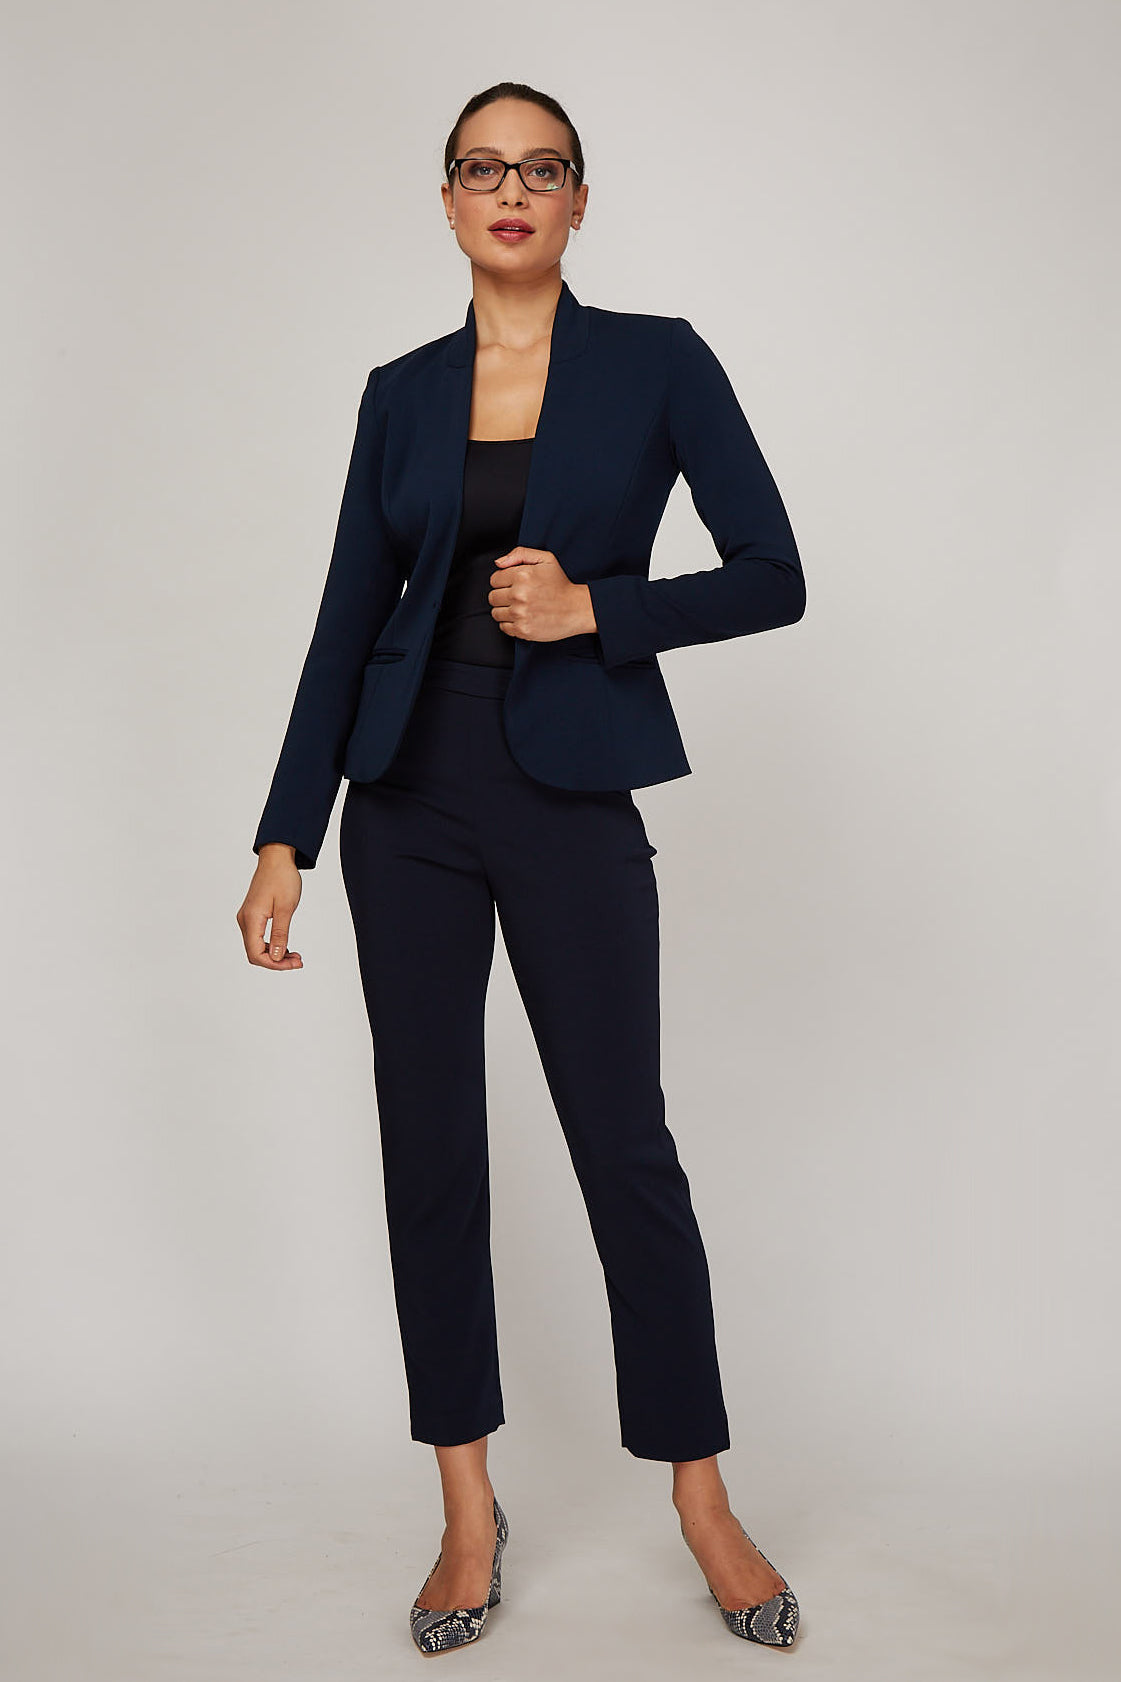 Women' Business Willow Blazer - Navy NORA GARDNER | OFFICIAL STORE for work and office